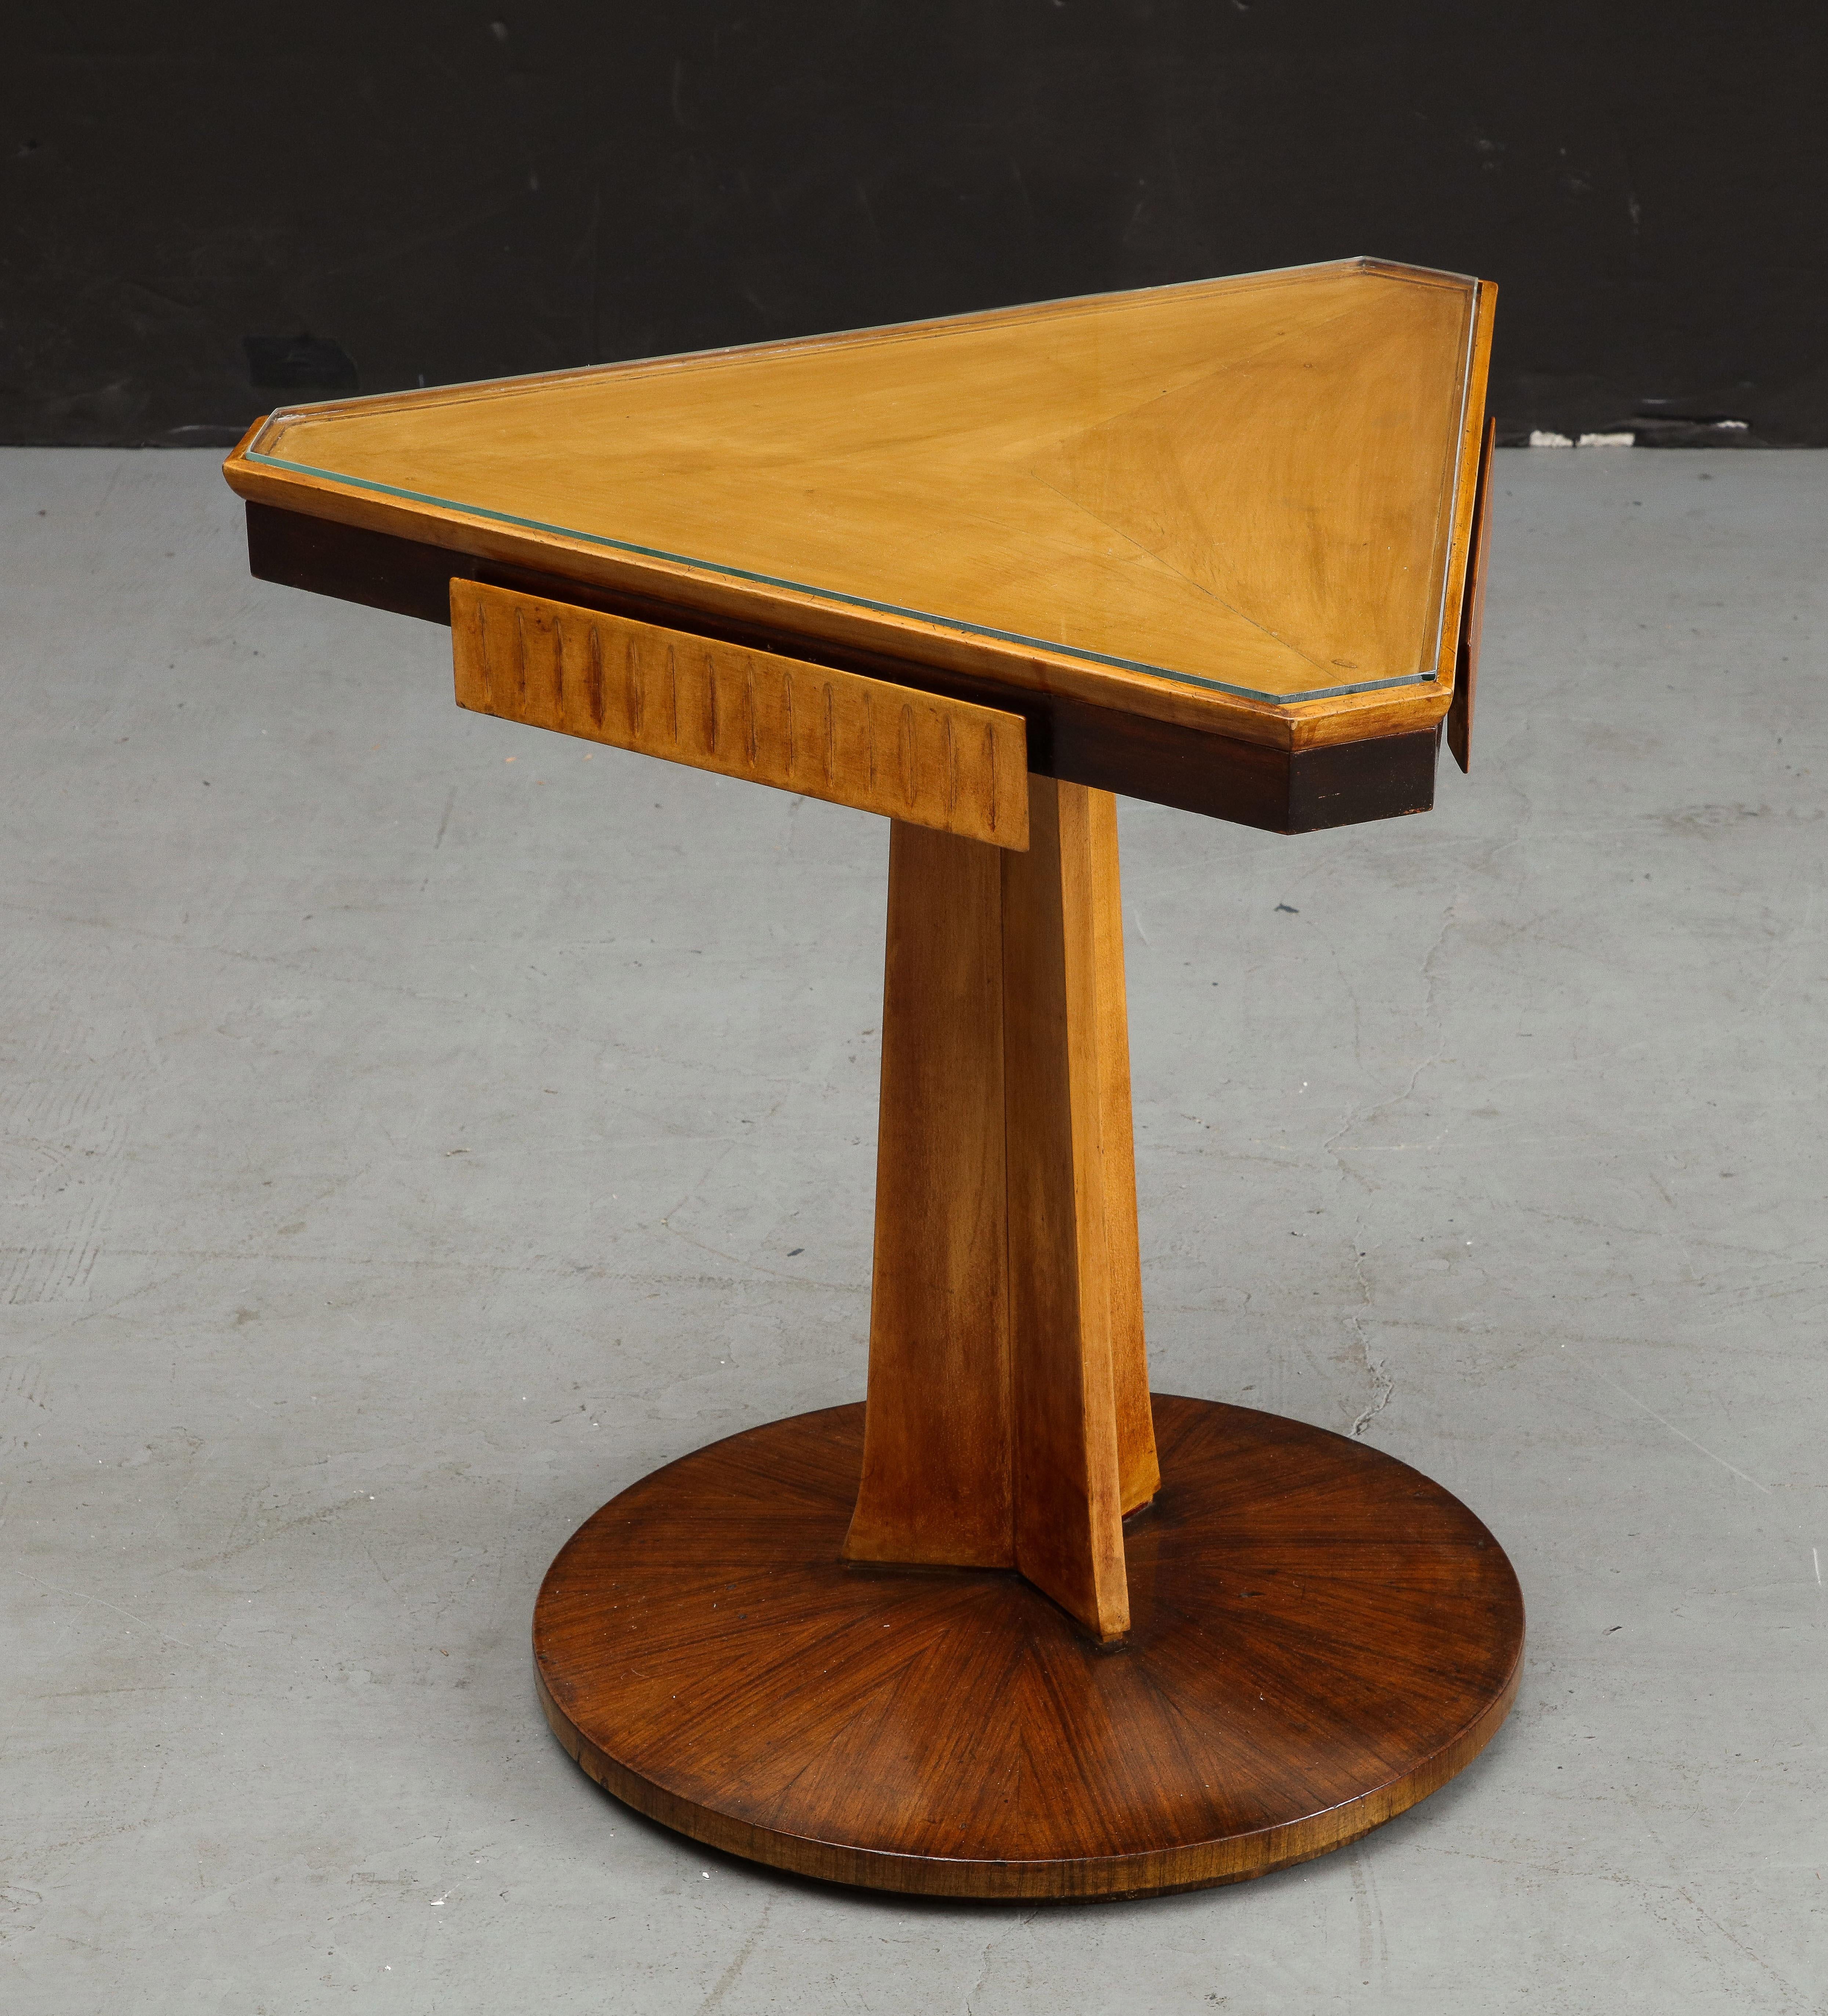 20th Century Midcentury Italian Triangular Fruitwood Side Table with Glass Top For Sale